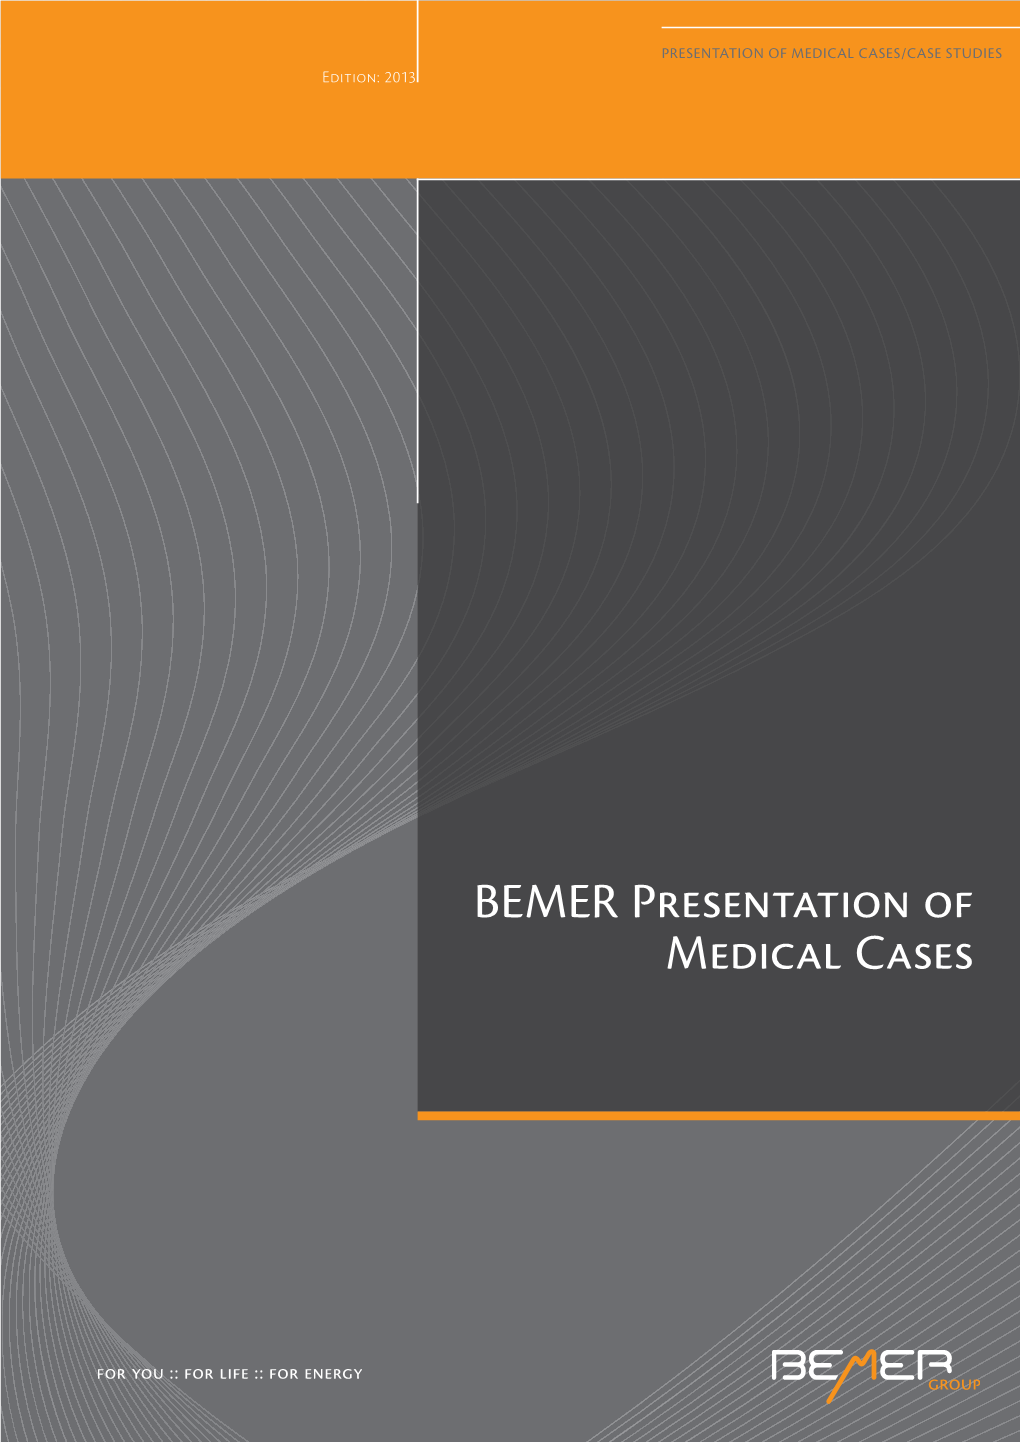 BEMER Presentation of Medical Cases LECTURES on CLINICAL EXPERIENCES USING BEMER THERAPY